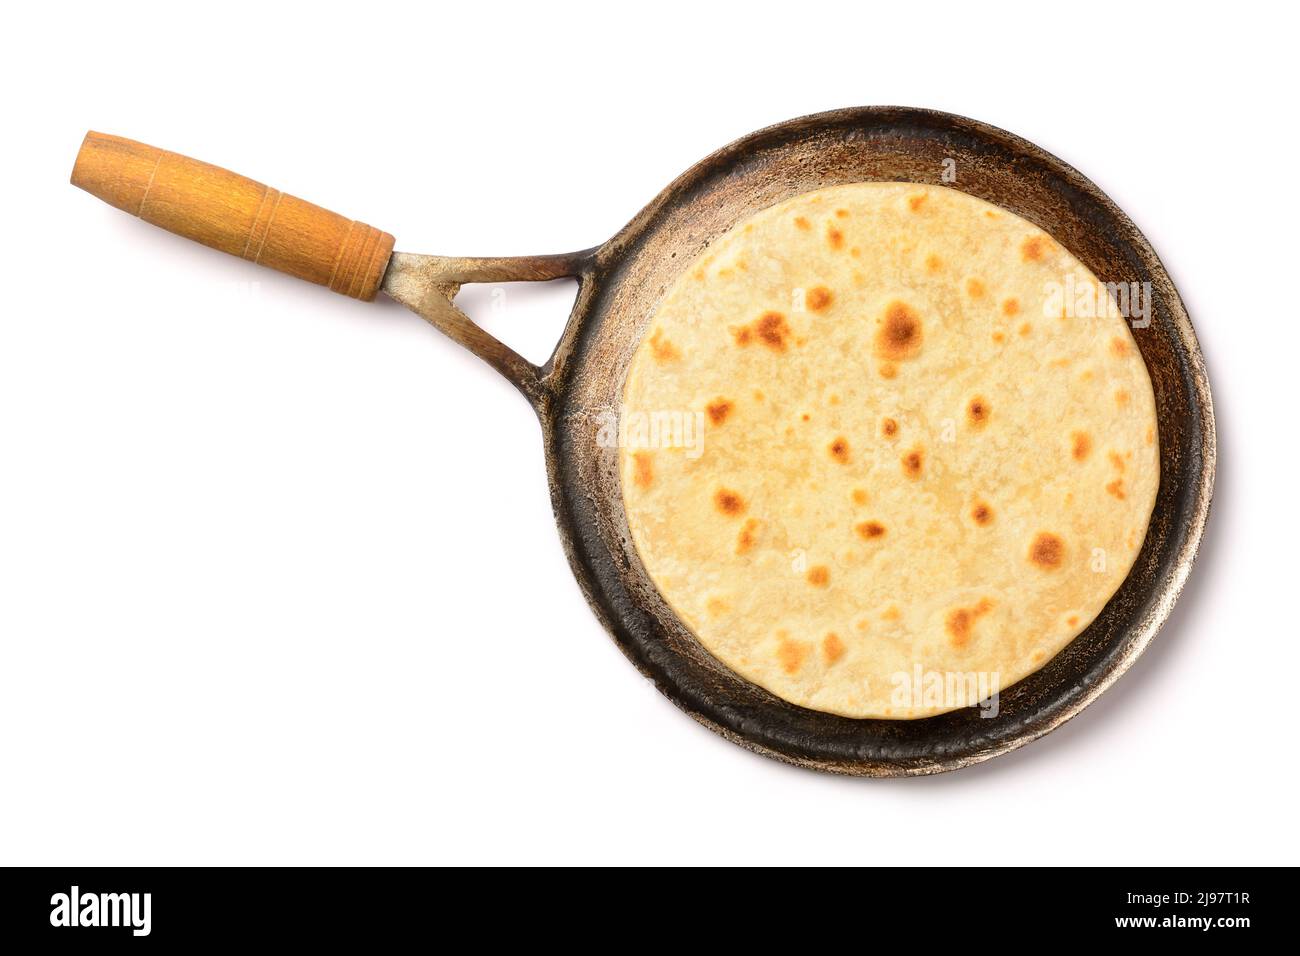 roti, also known as chapati or indian bread, a type of flat rough south asian bread on a roti pan, freshly baked indian flat bread isolated on white Stock Photo